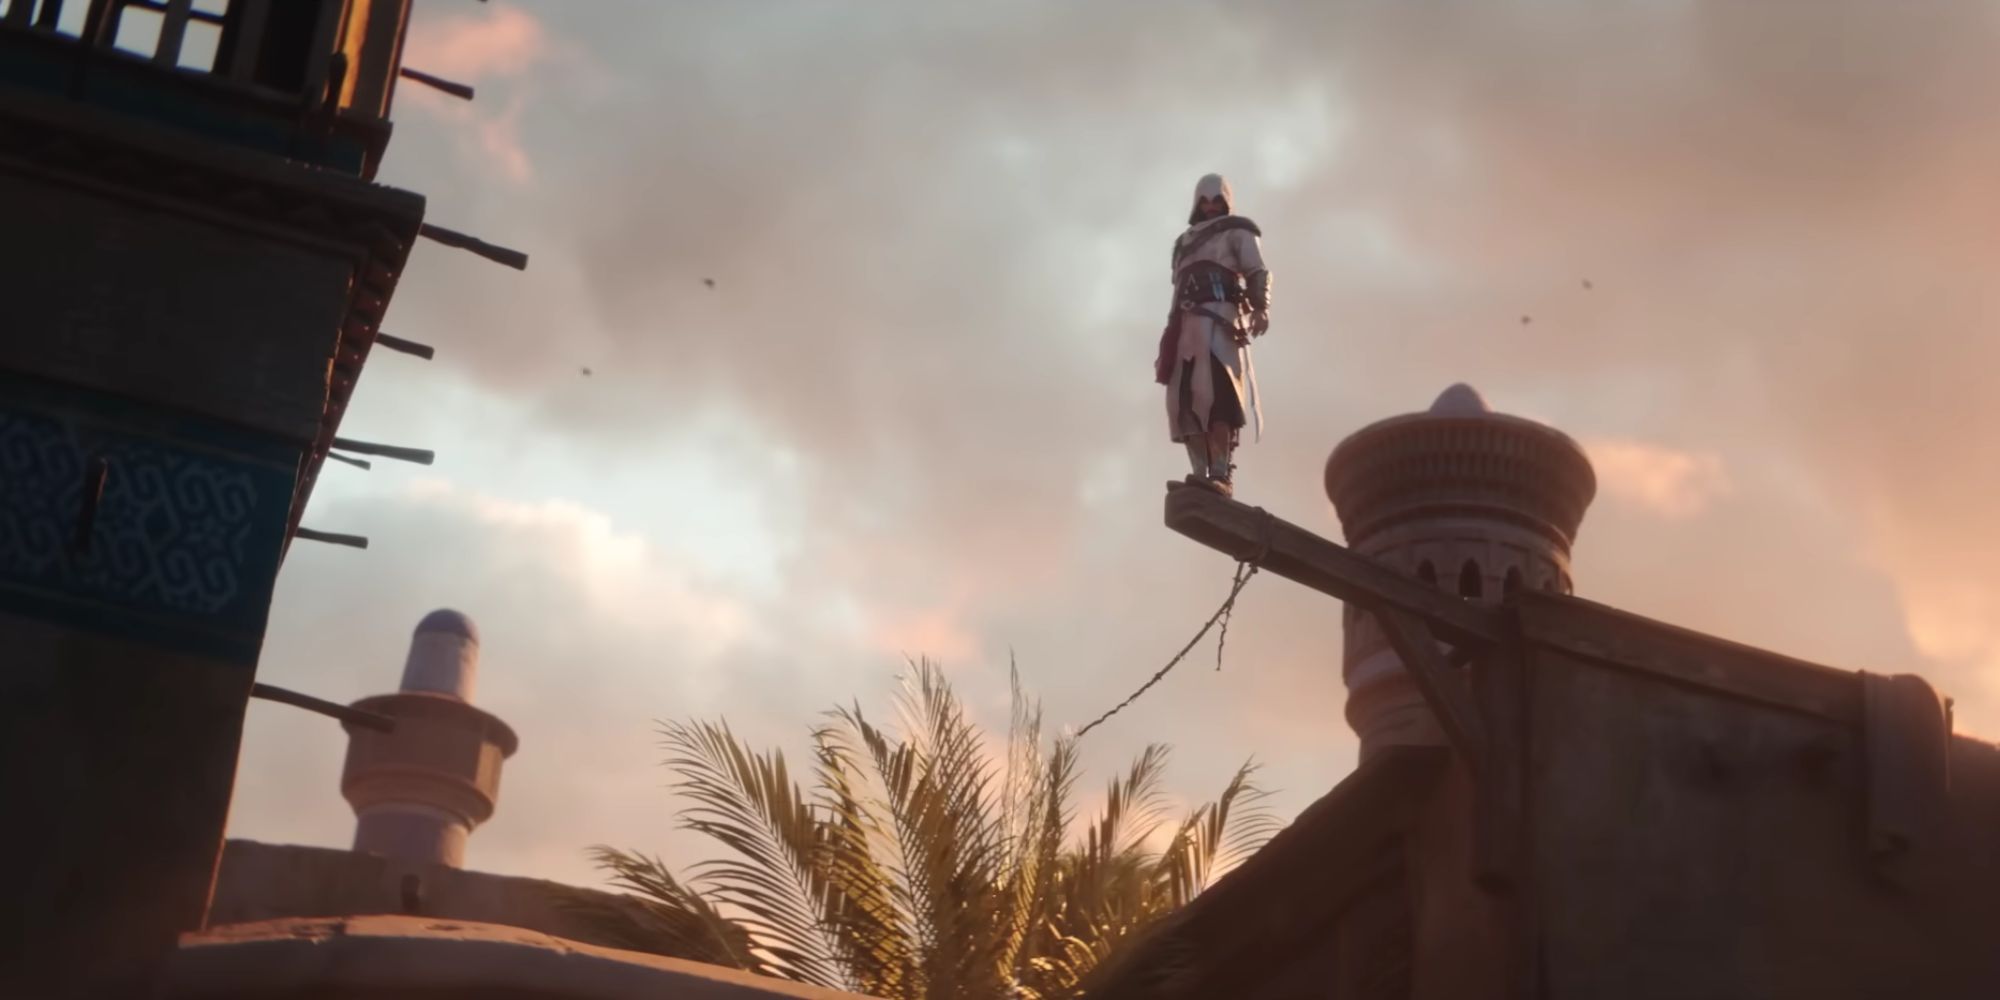 Basim looking like Ezio in the Assassin's Creed Mirage reveal trailer.